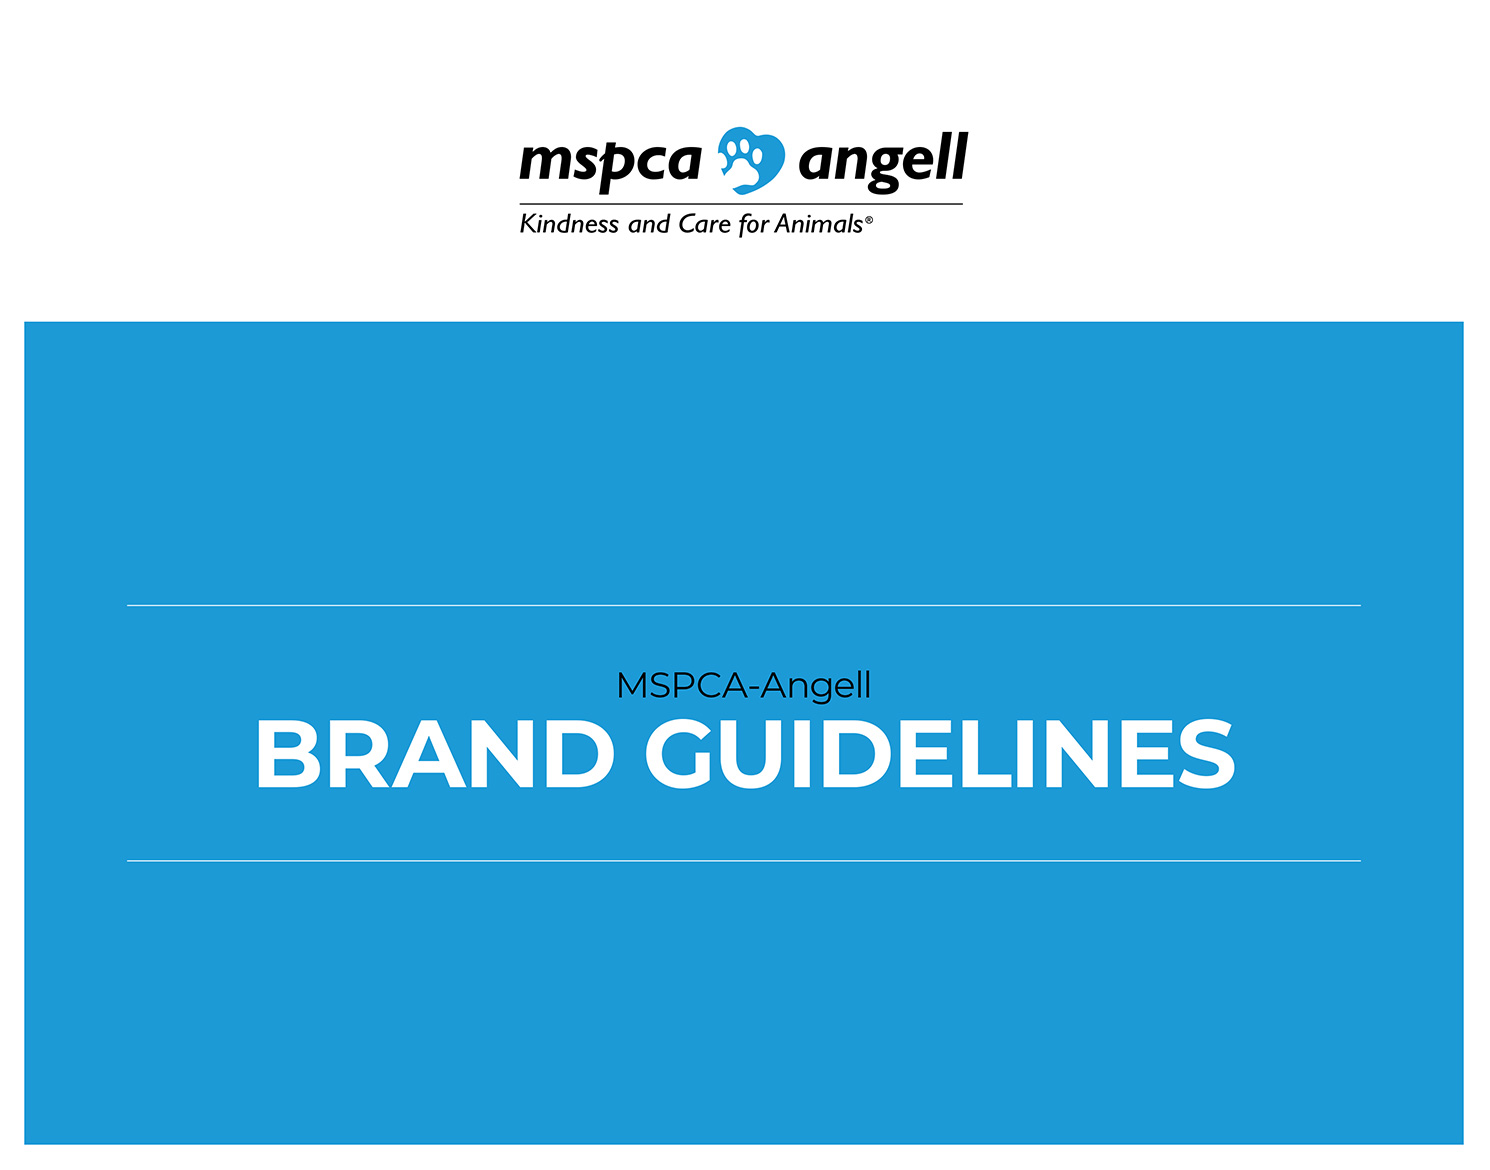 MSPCA-Angell brand guide cover